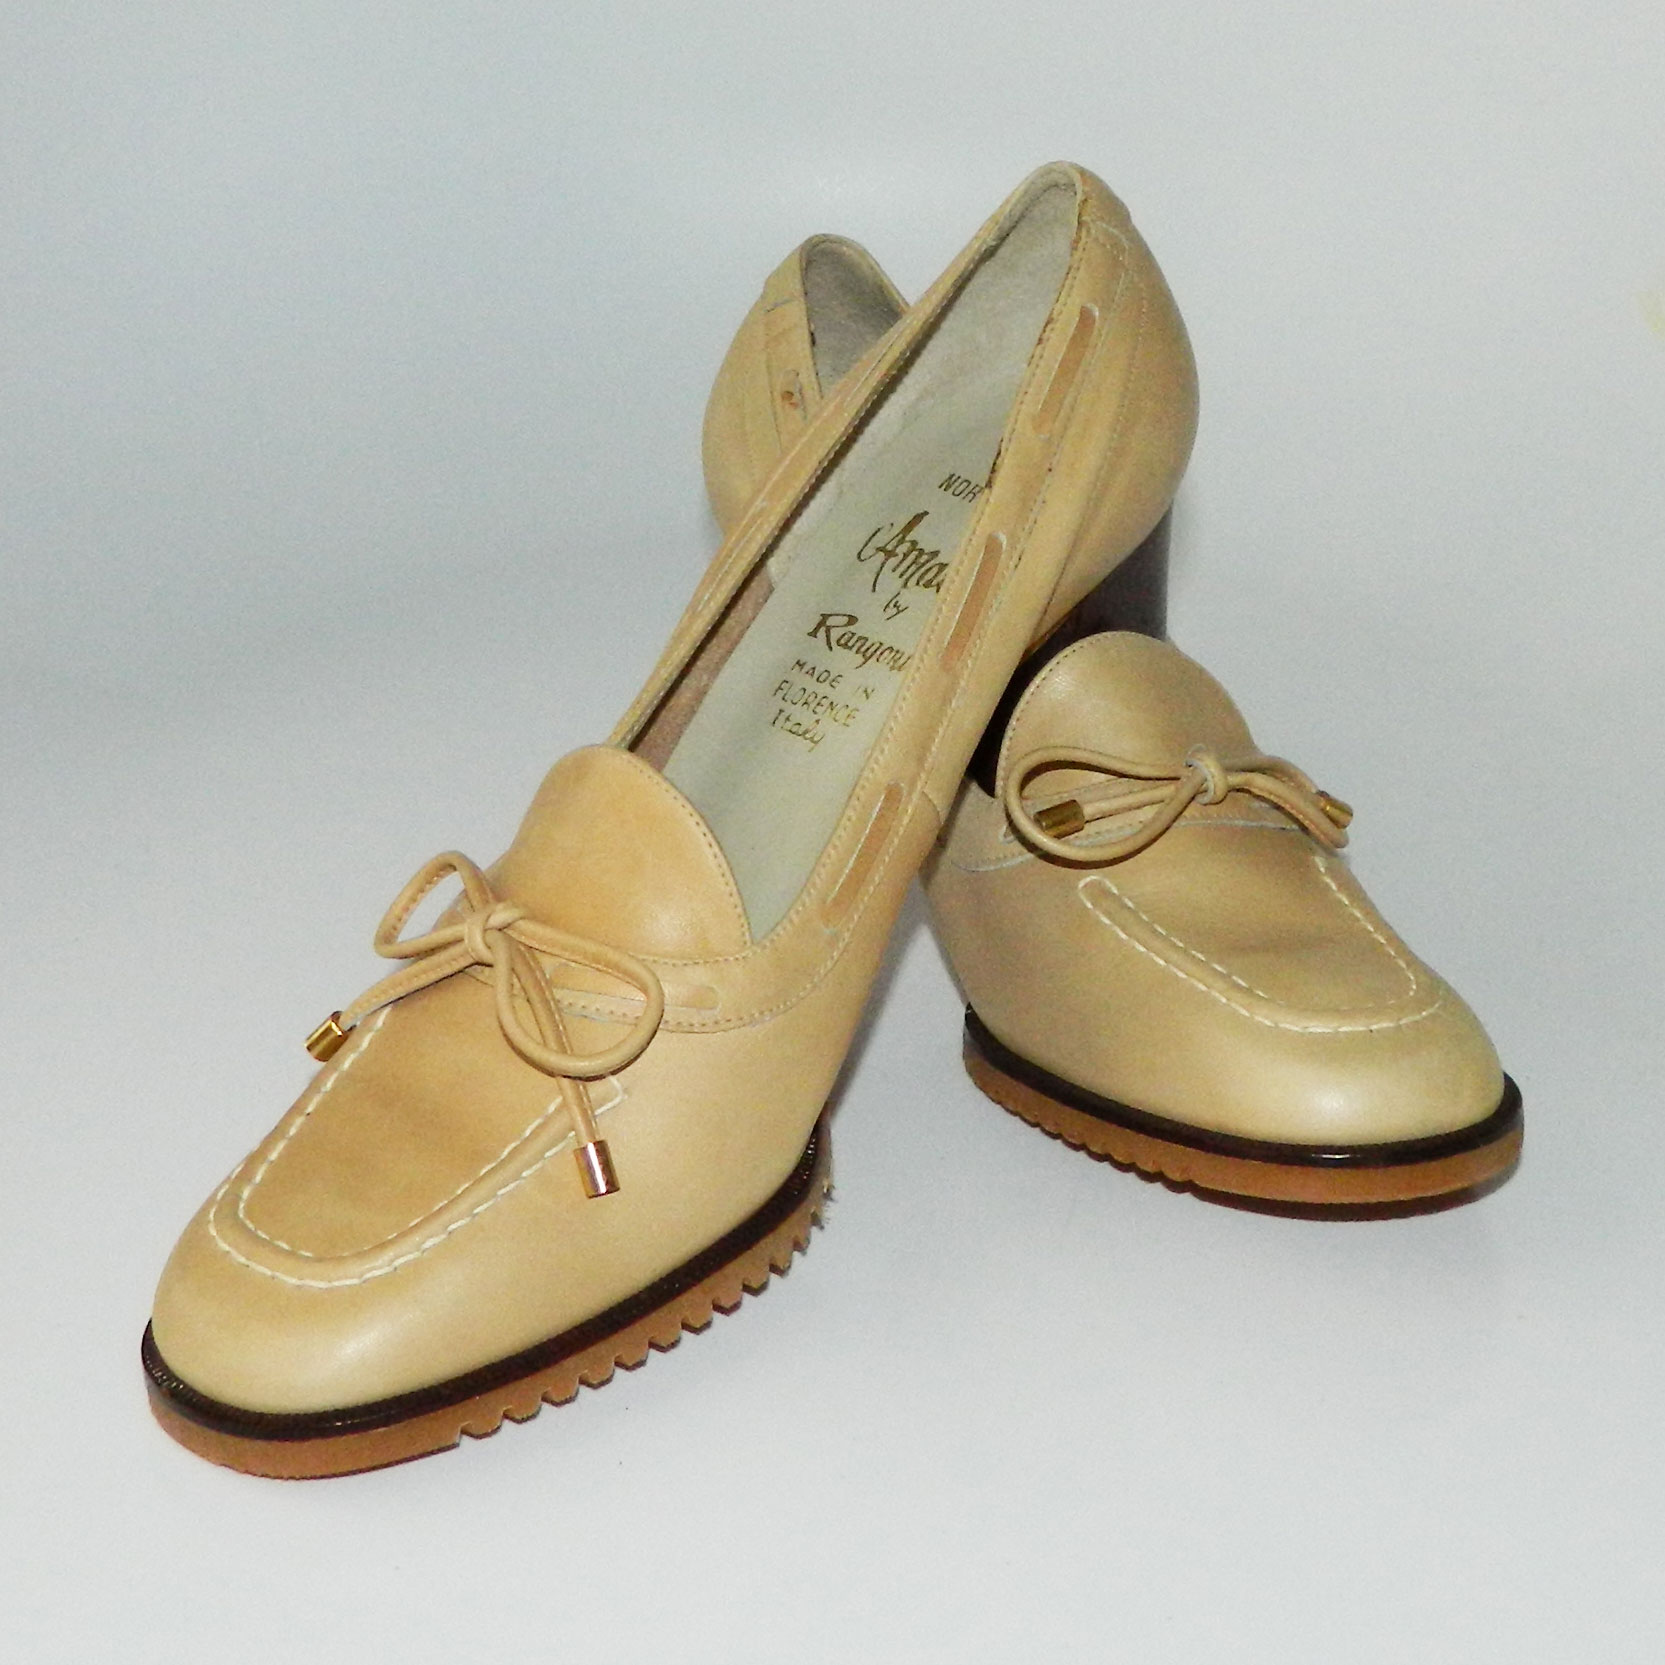 1970s Italian Leather Shoes